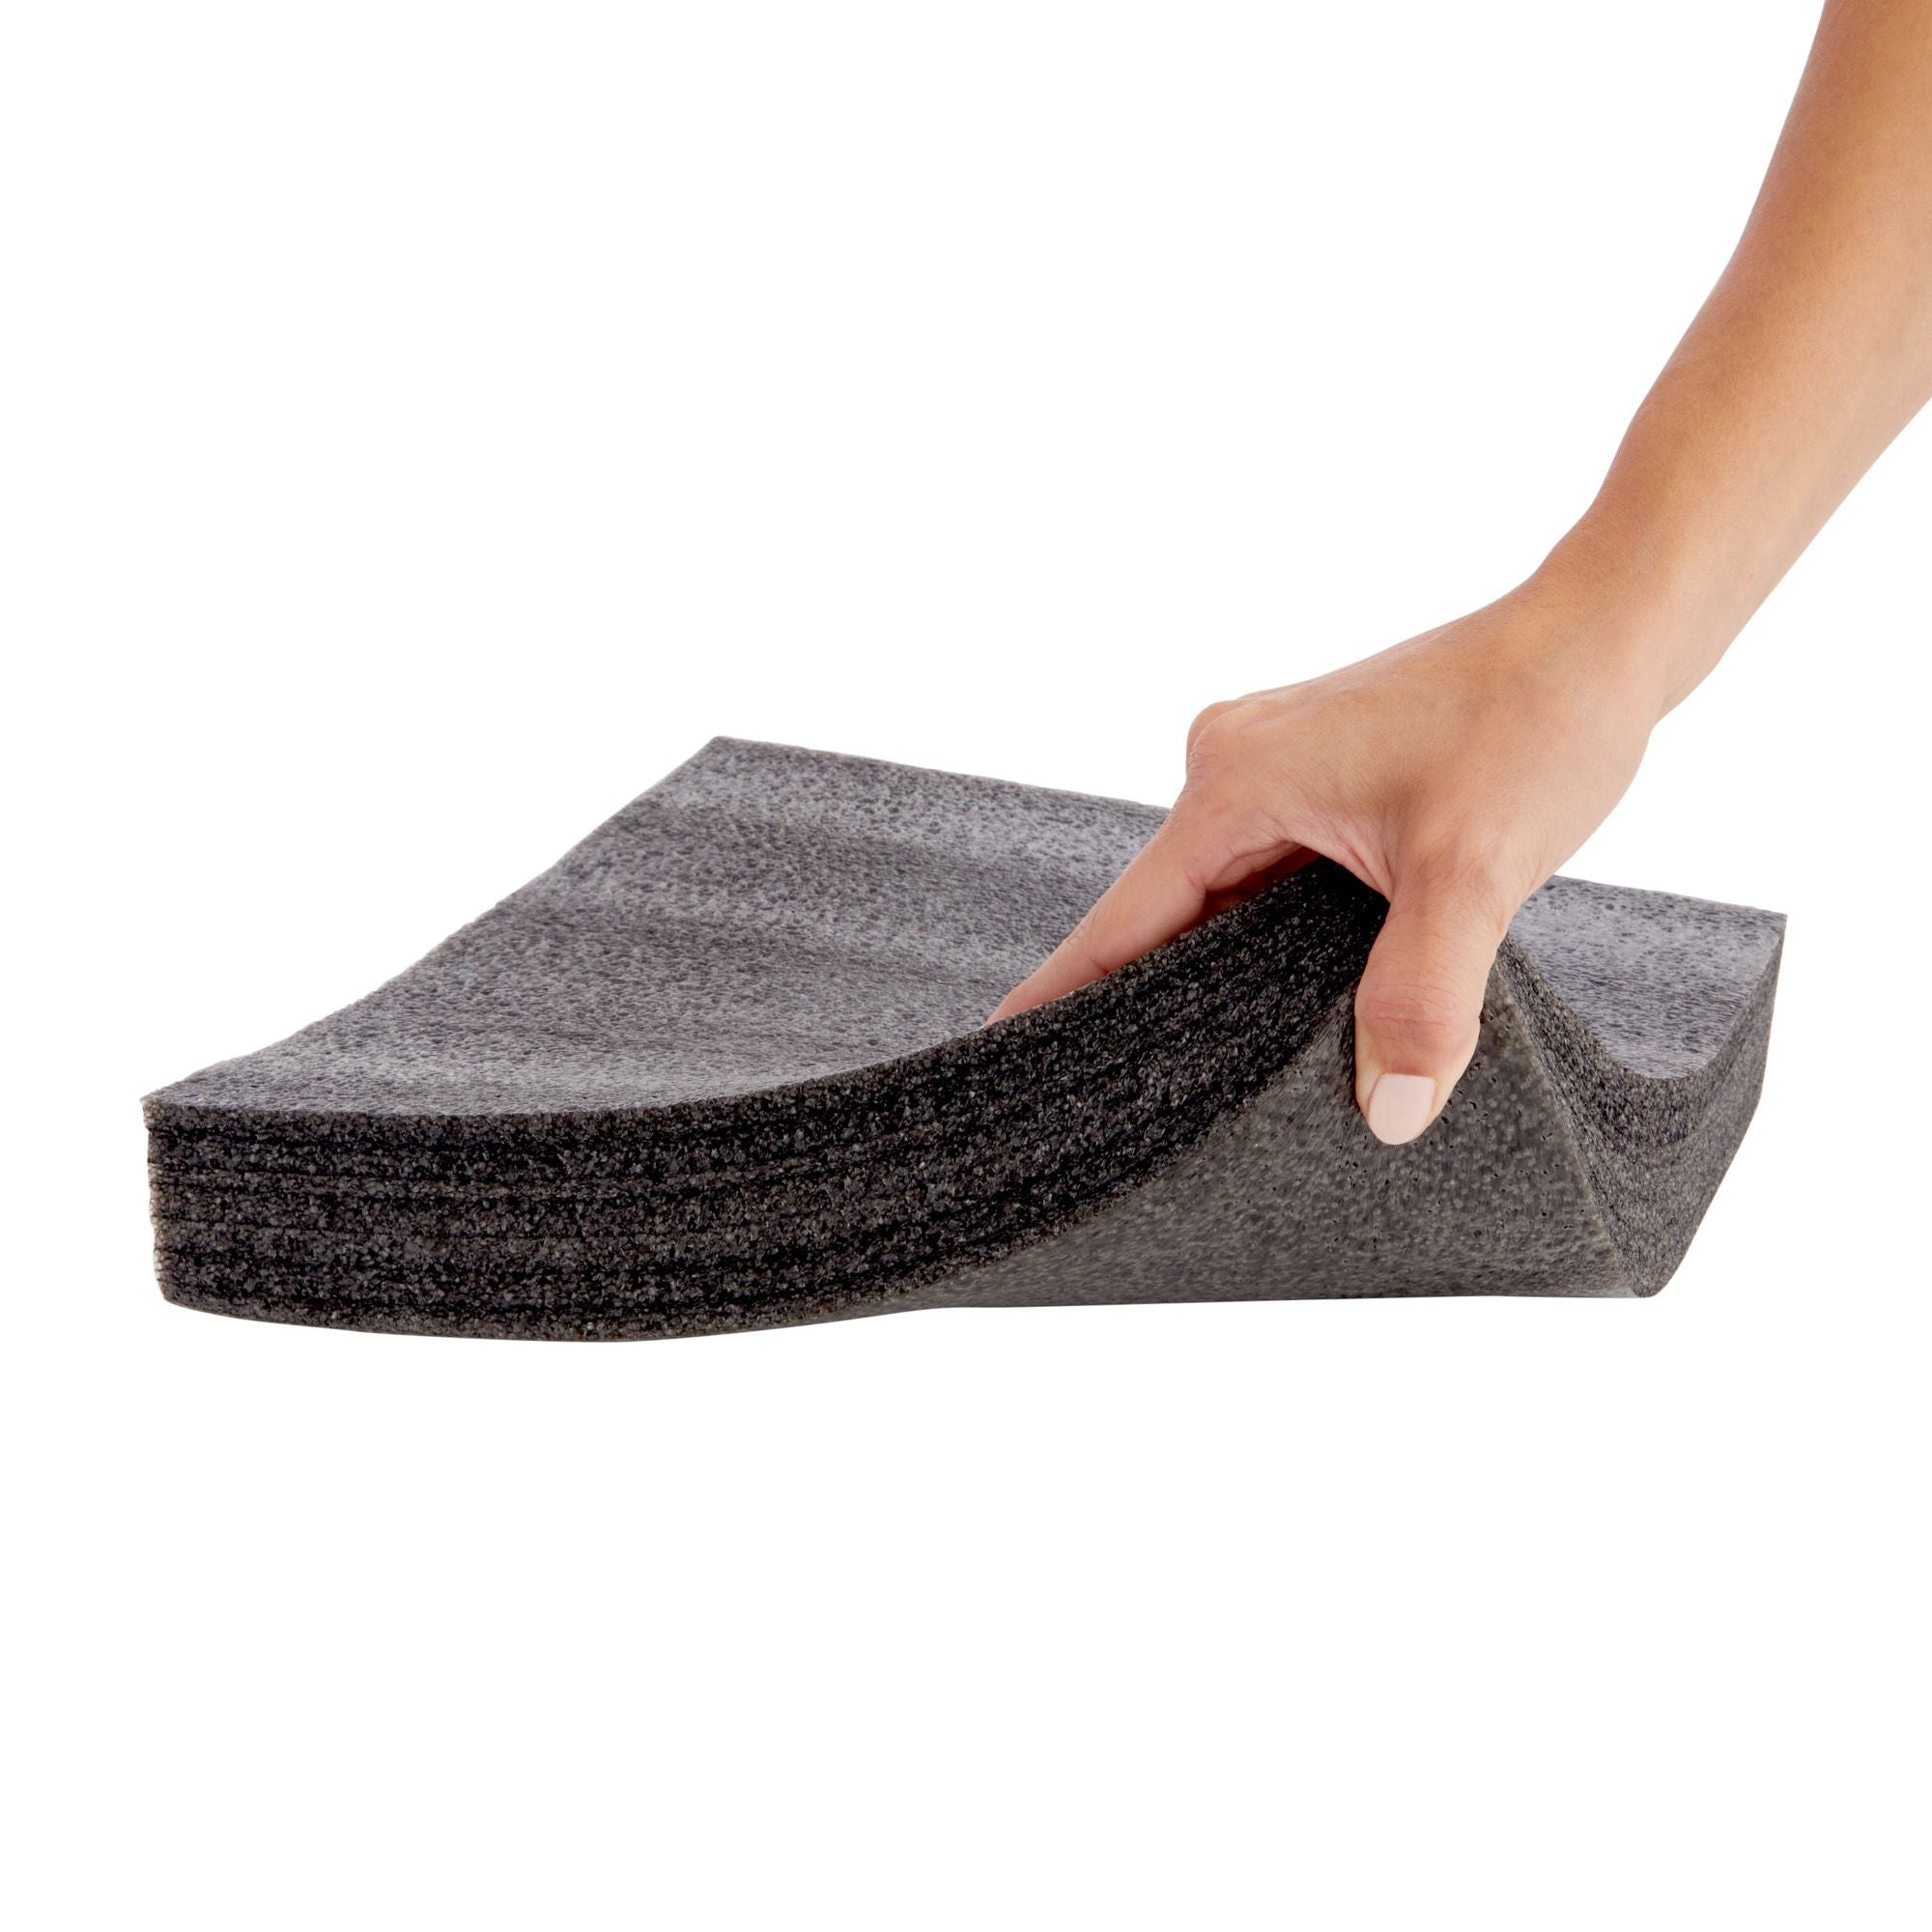 2-Pack Customizable Polyethylene Foam for Packing and Crafts